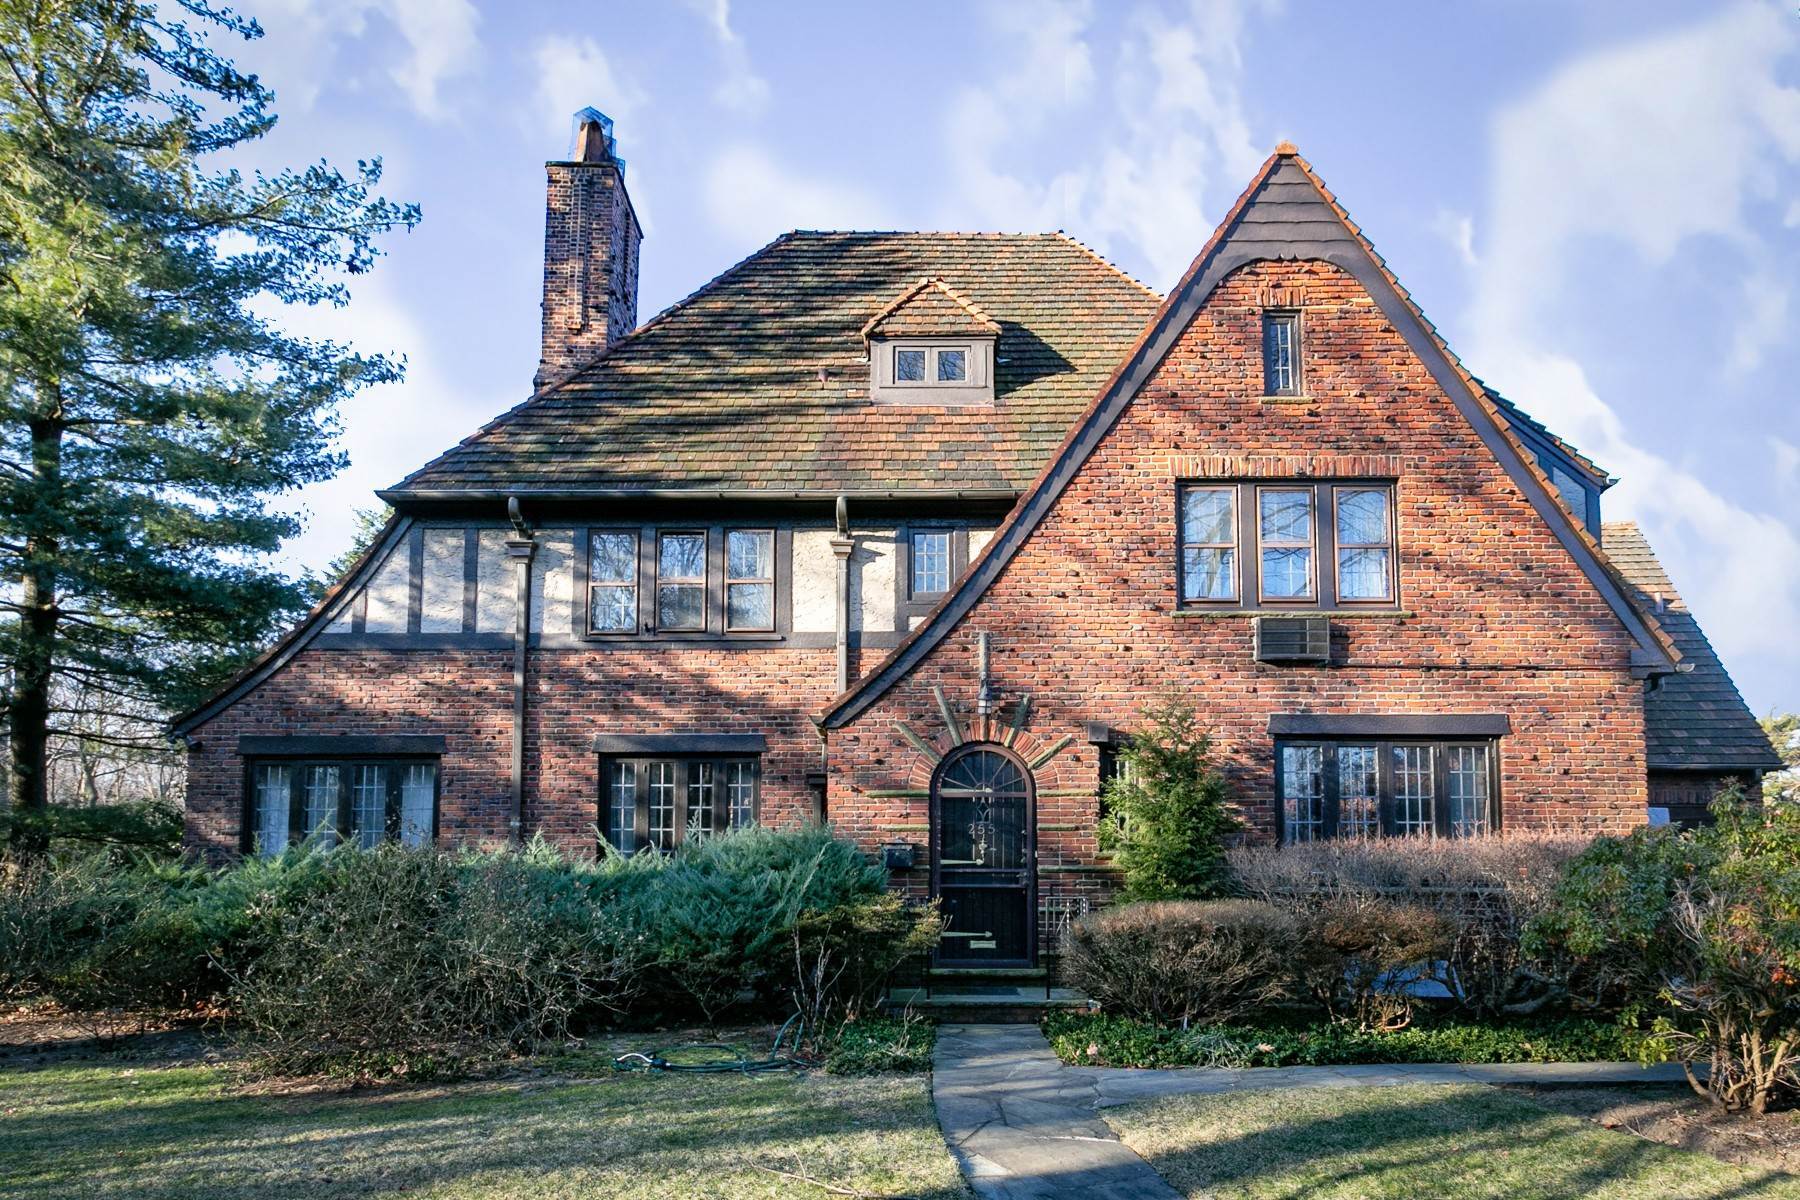 Single Family Homes for Sale at ARTS AND CRAFTS GRAND TUDOR 255 Greenway North, Forest Hills Gardens, Forest Hills, New York 11375 United States